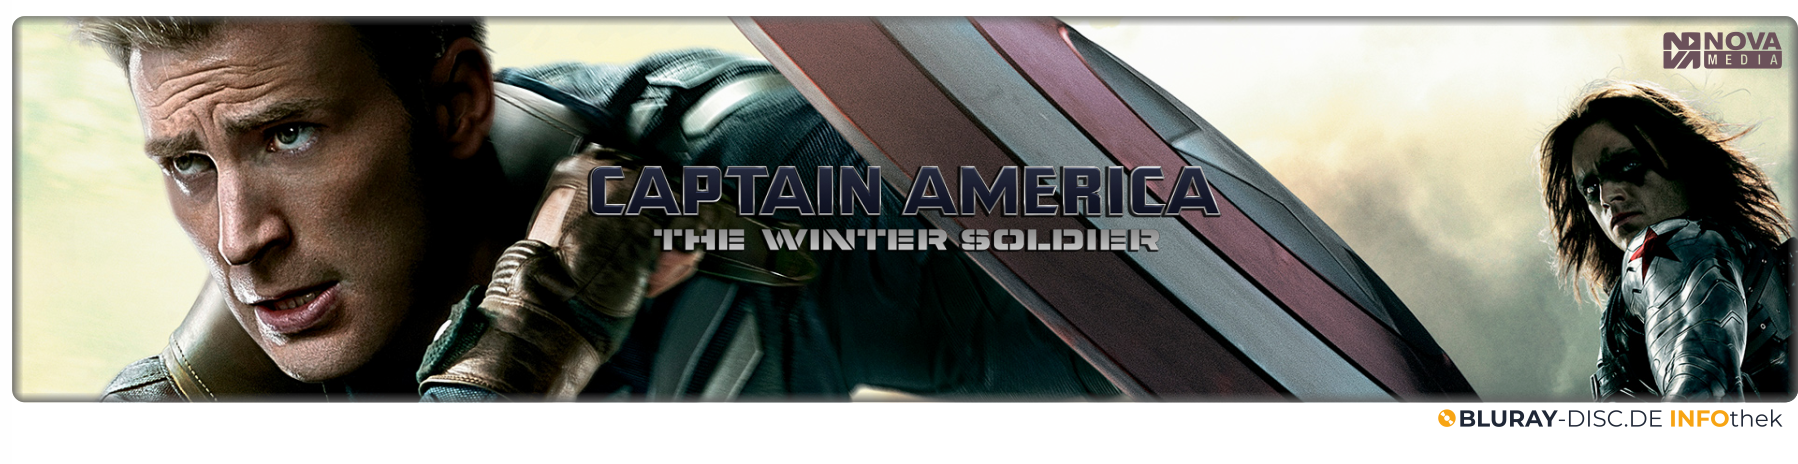 Captain_America_-_The_Winter_Soldier.png